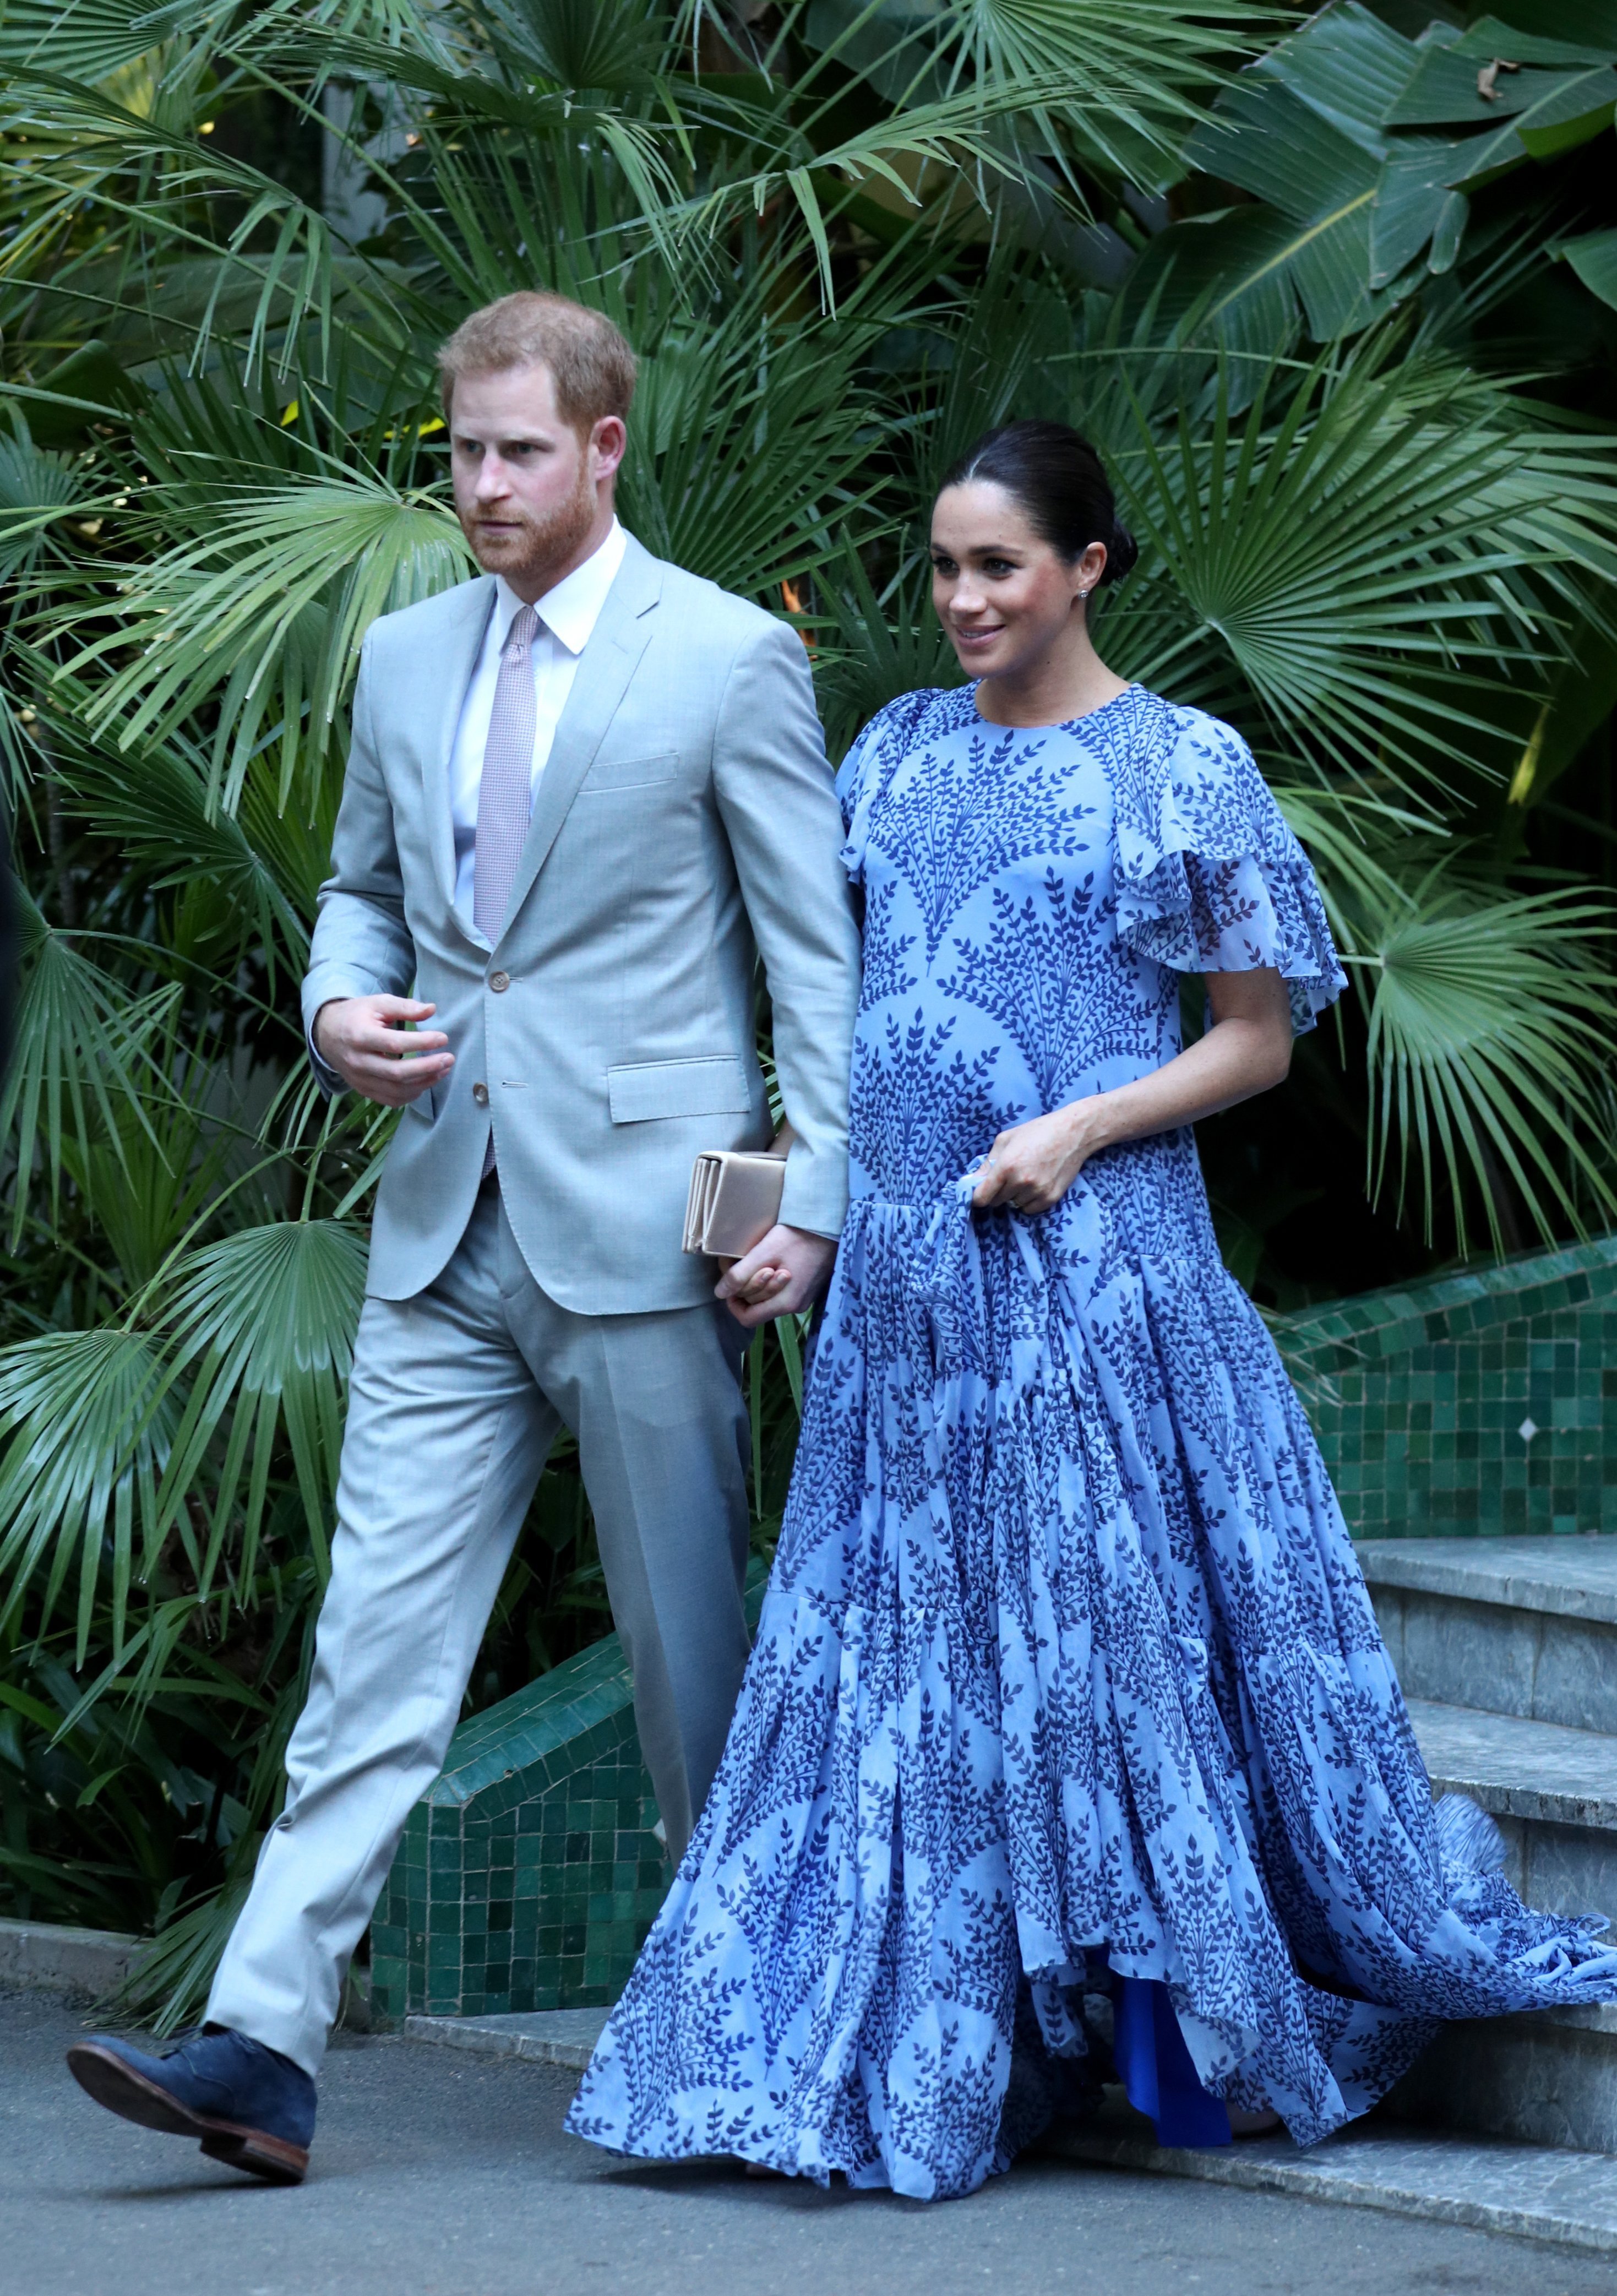 Prince Harry and Meghan Markle in Rabat, Morocco in February 2019 | Photo: Getty Images